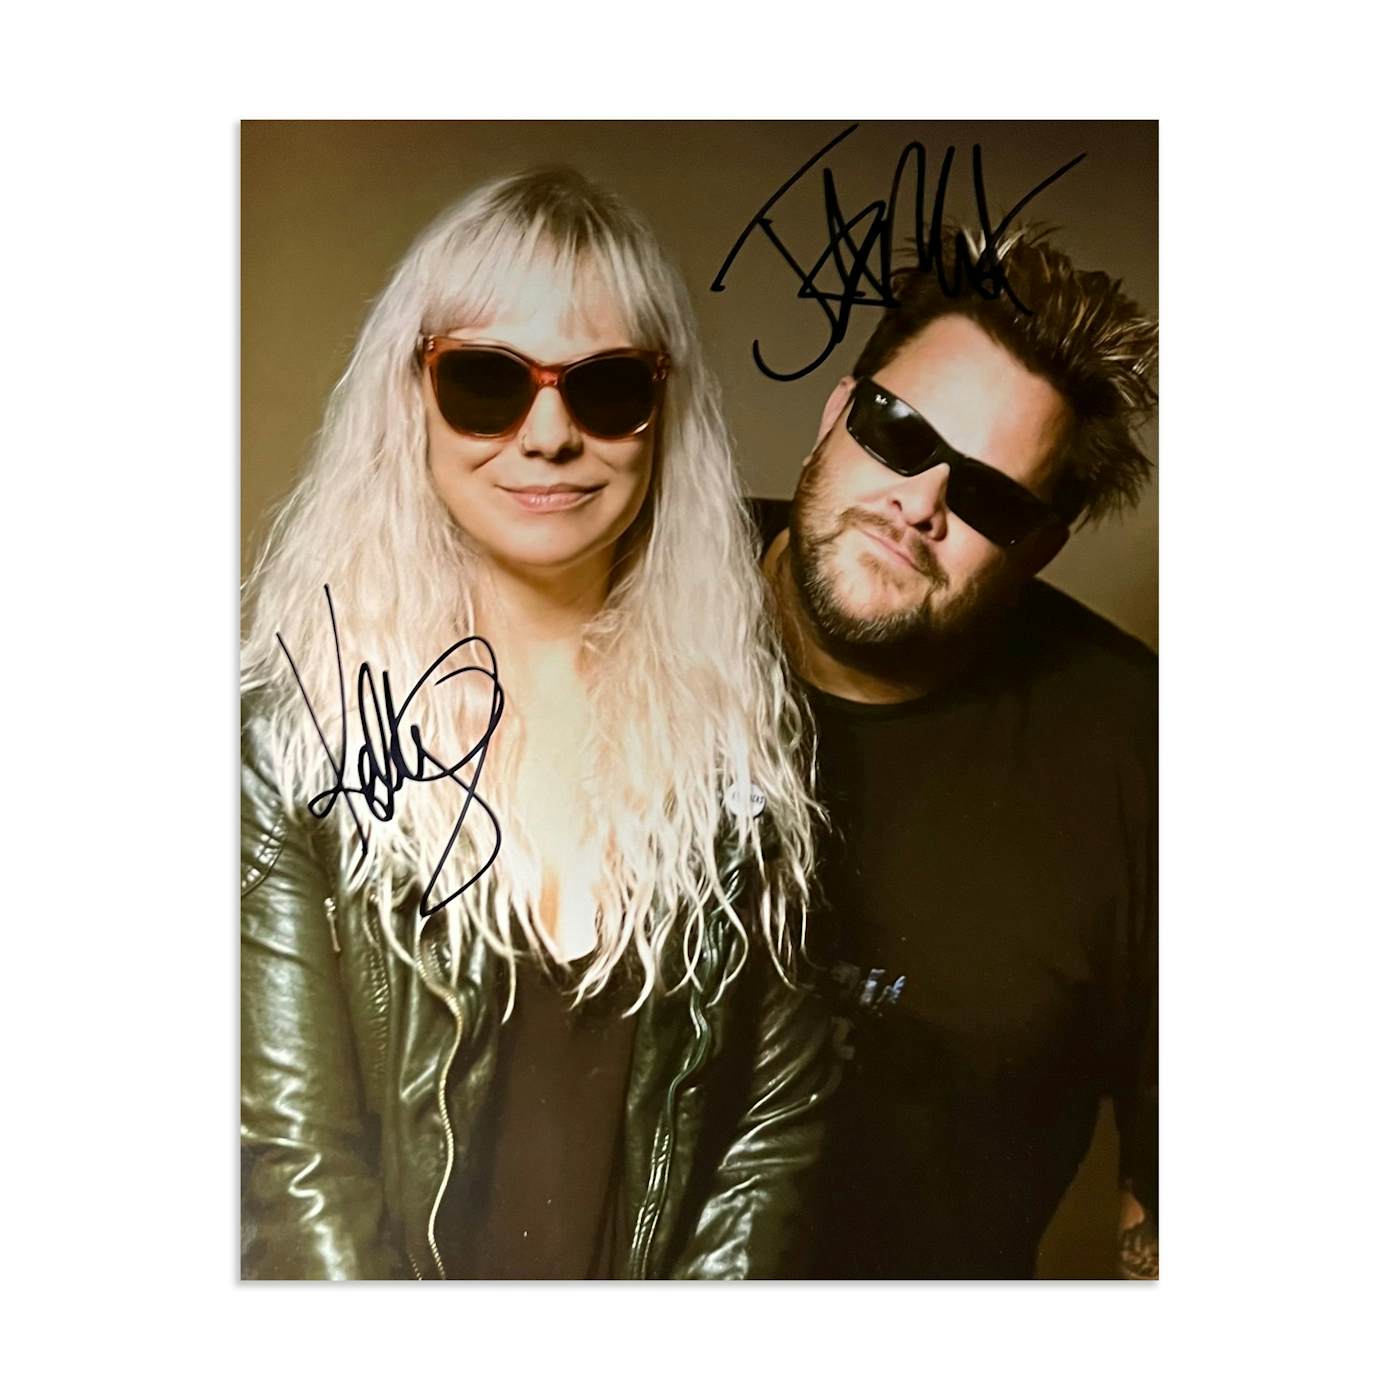 Jaret and Kelly - Autographed 8x10 Photo